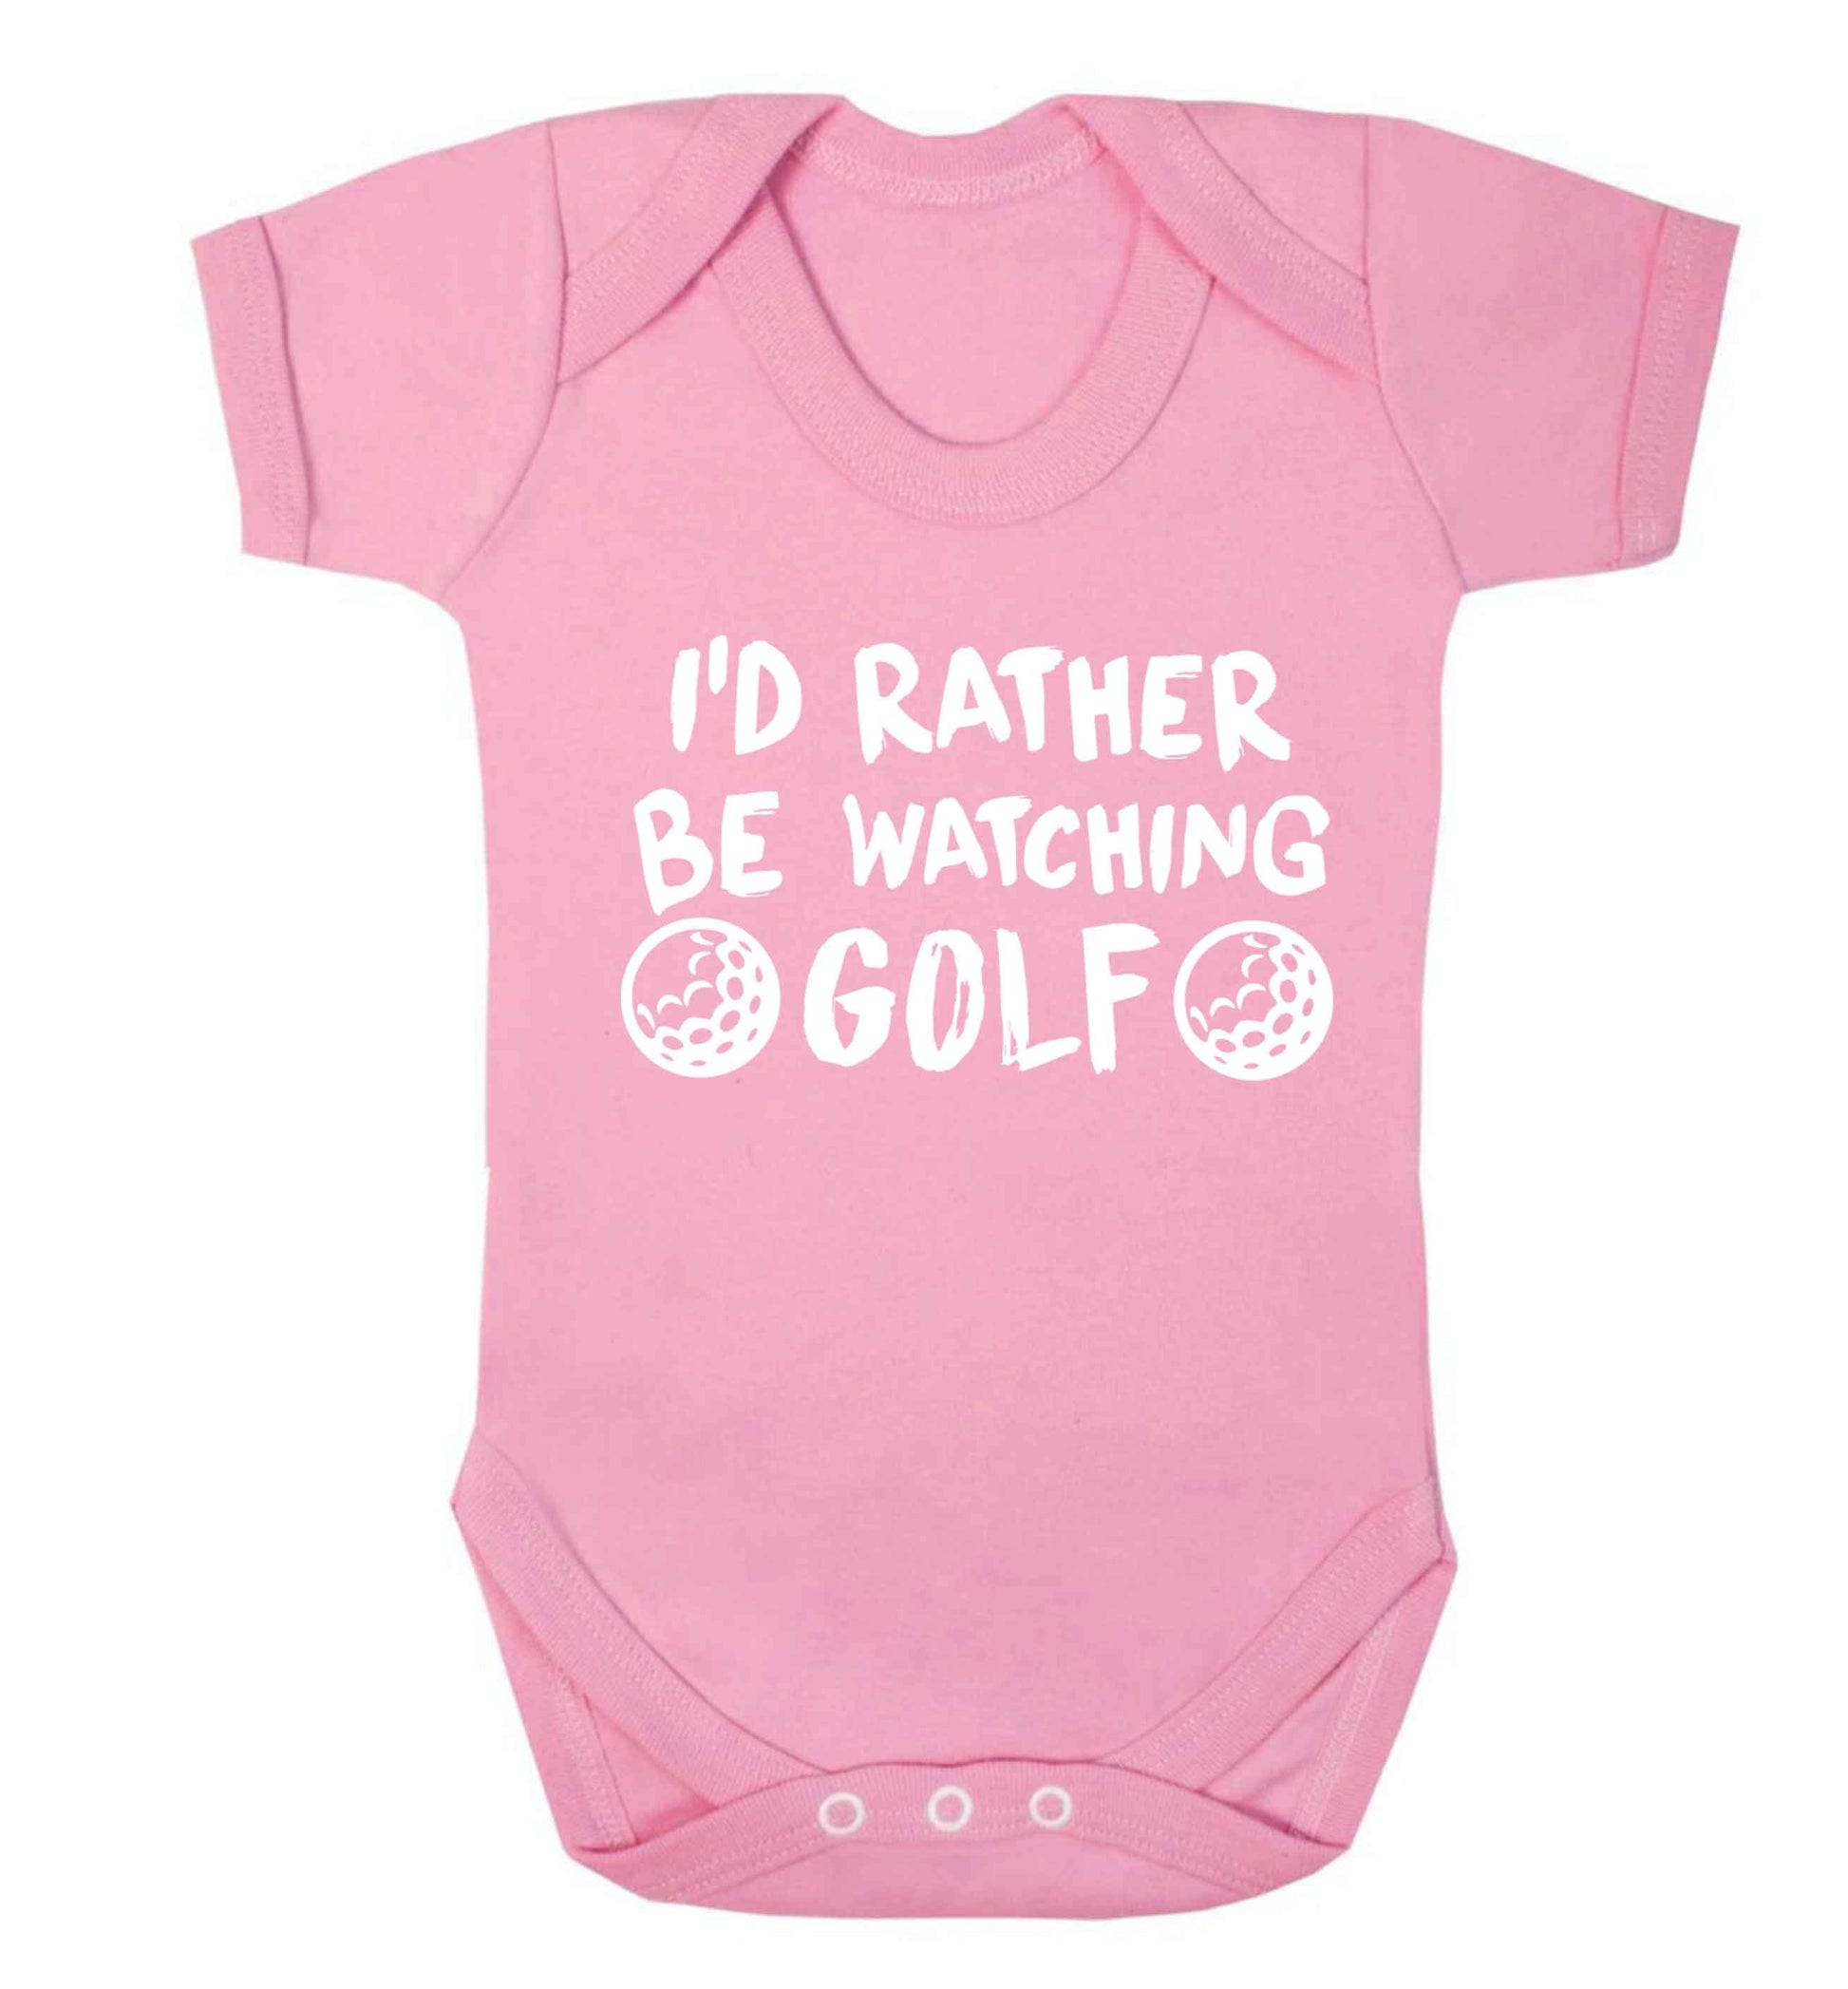 I'd rather be watching golf Baby Vest pale pink 18-24 months